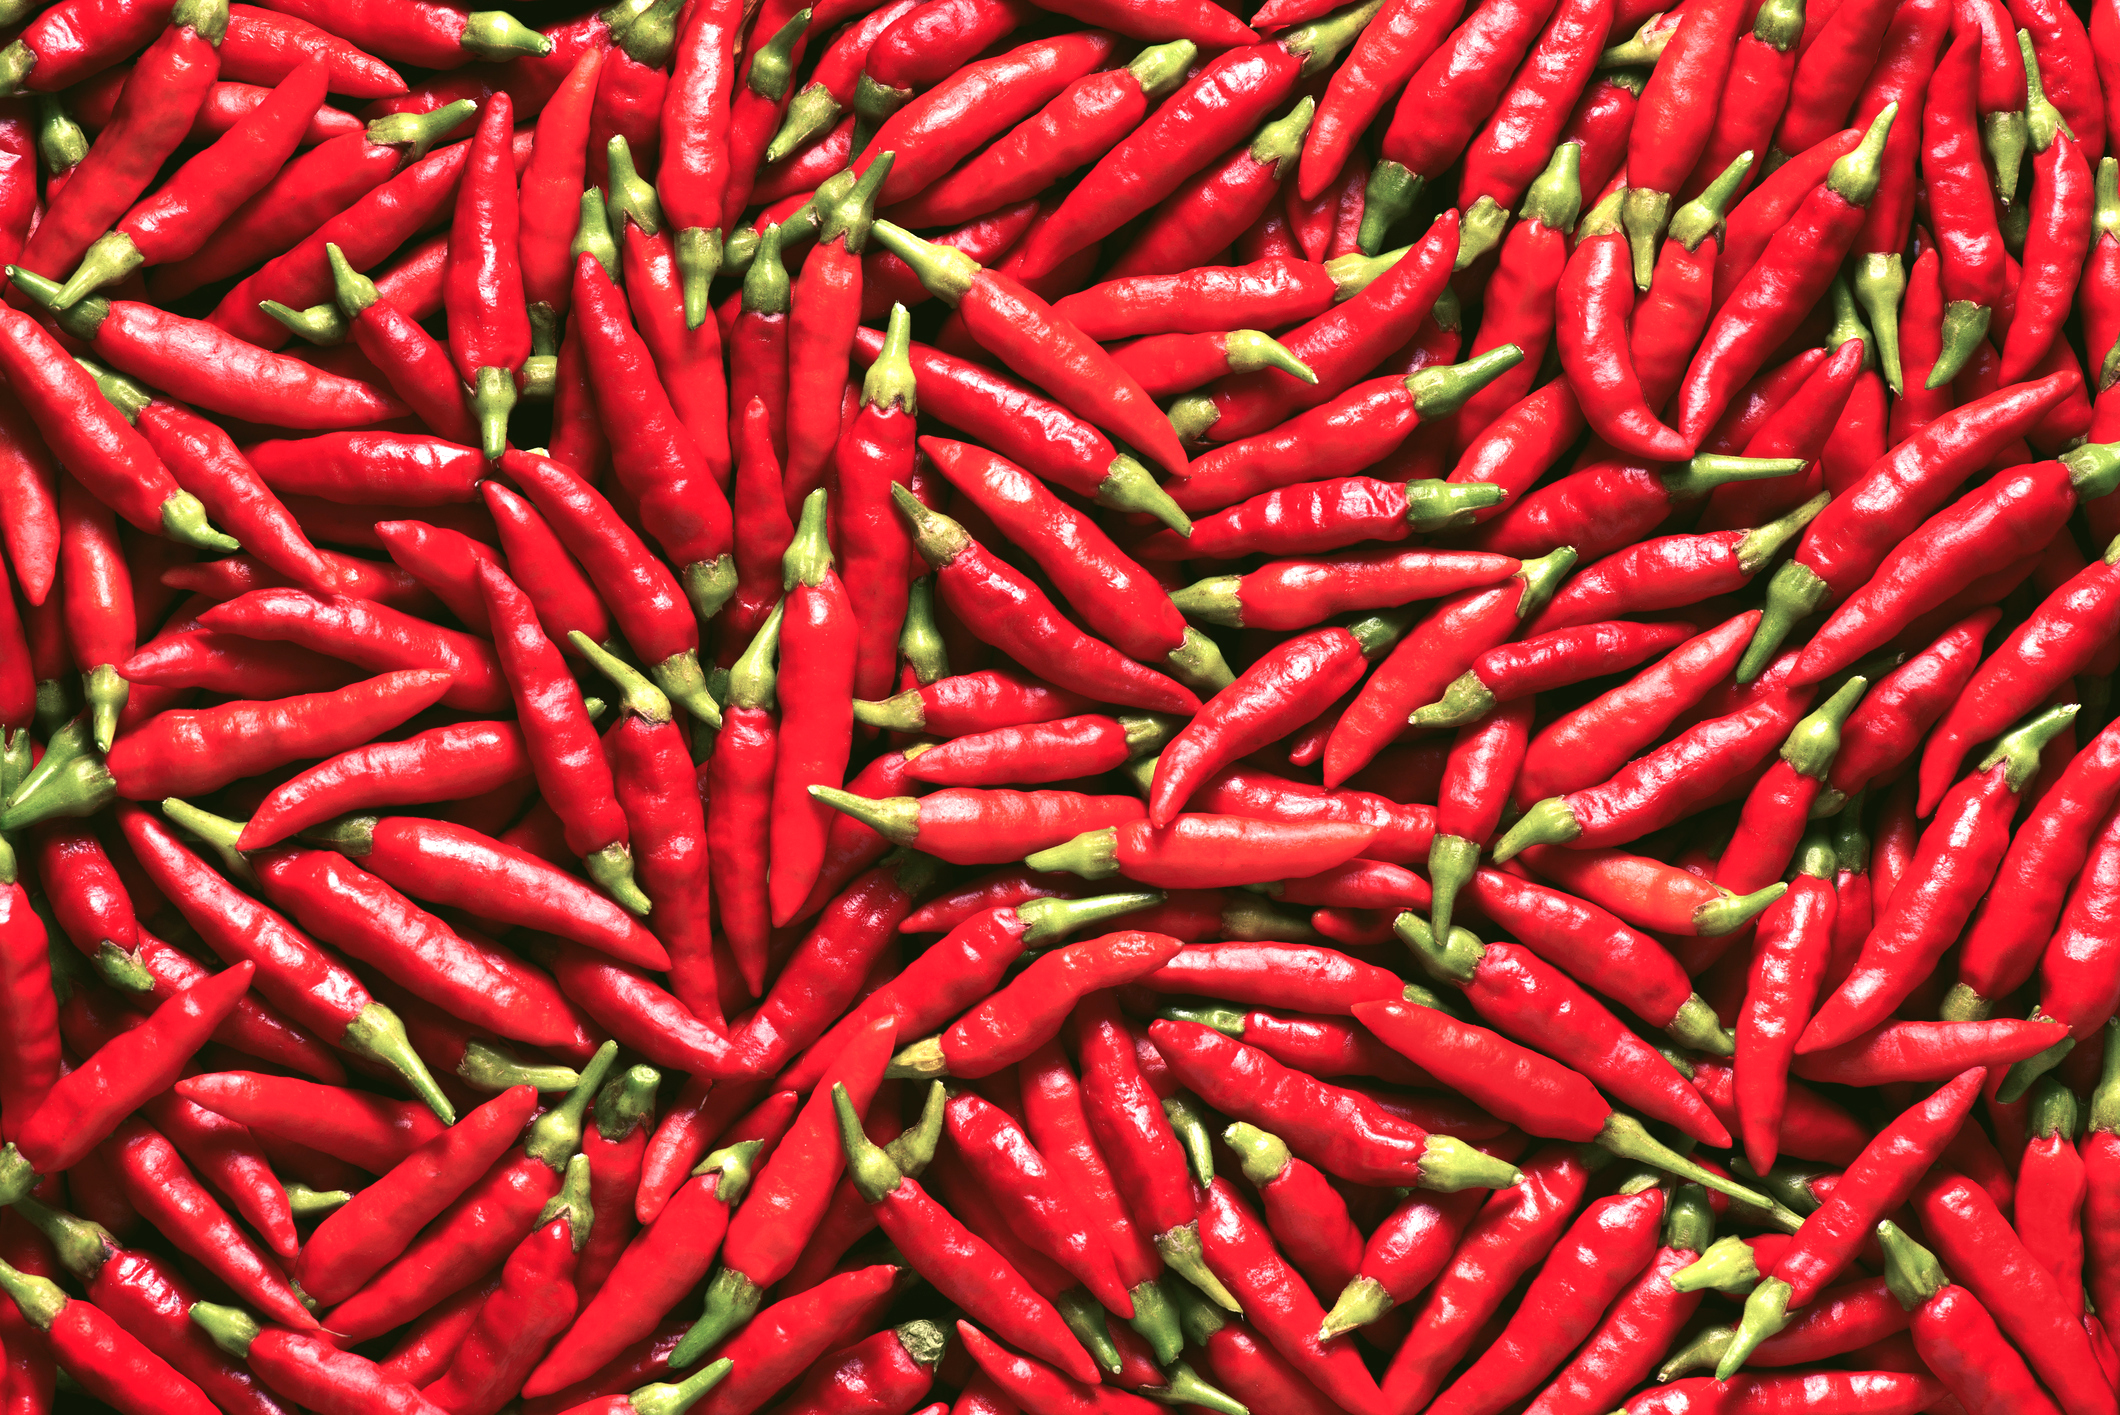 Hot peppers.